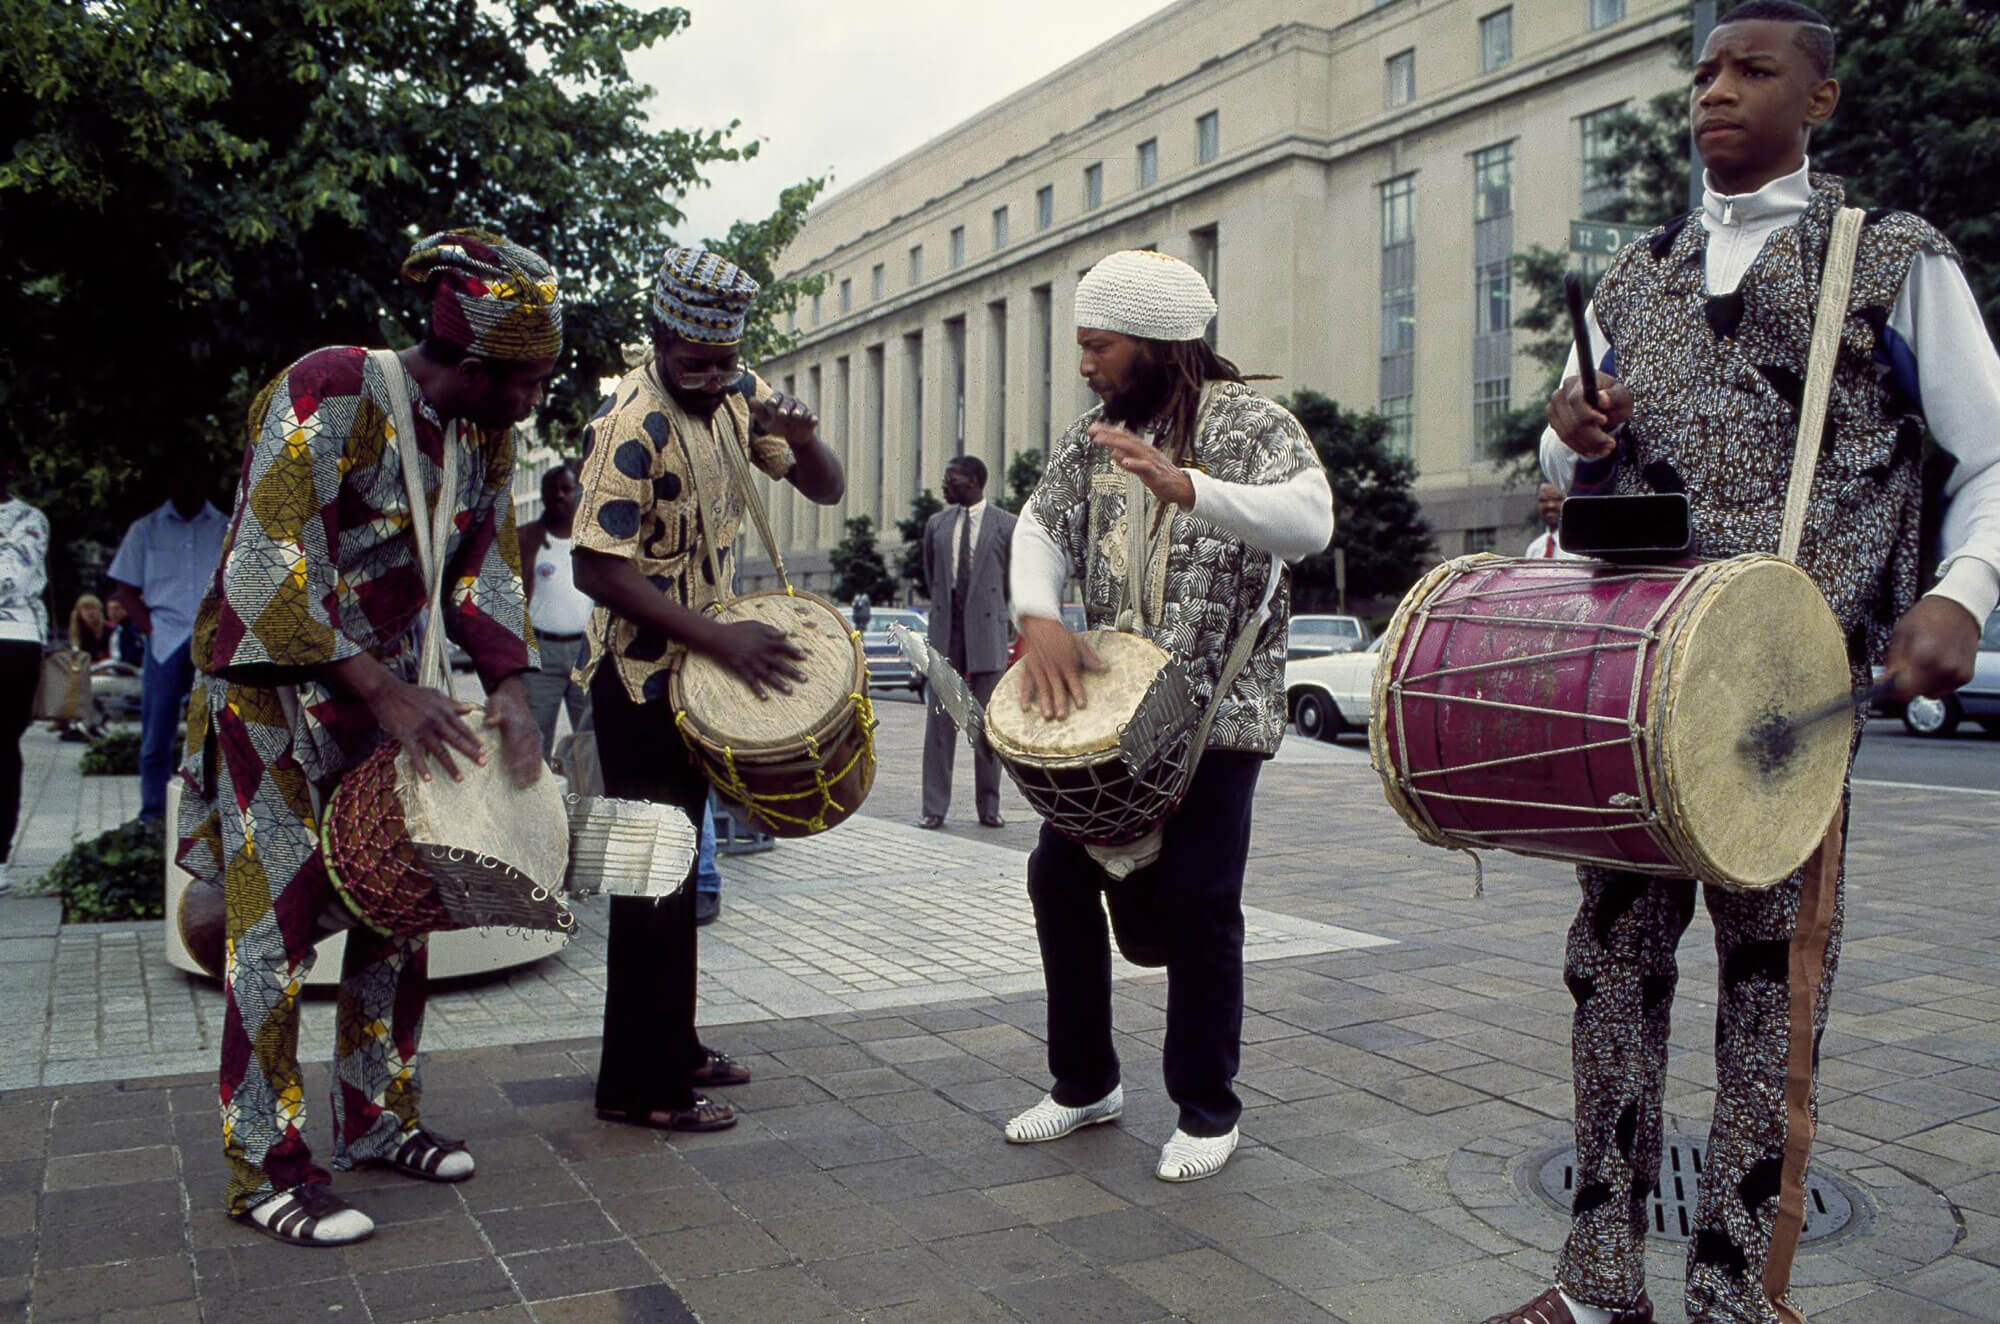 four street performers playing drums on Pennsylvania Avenue in Washington, D.C.